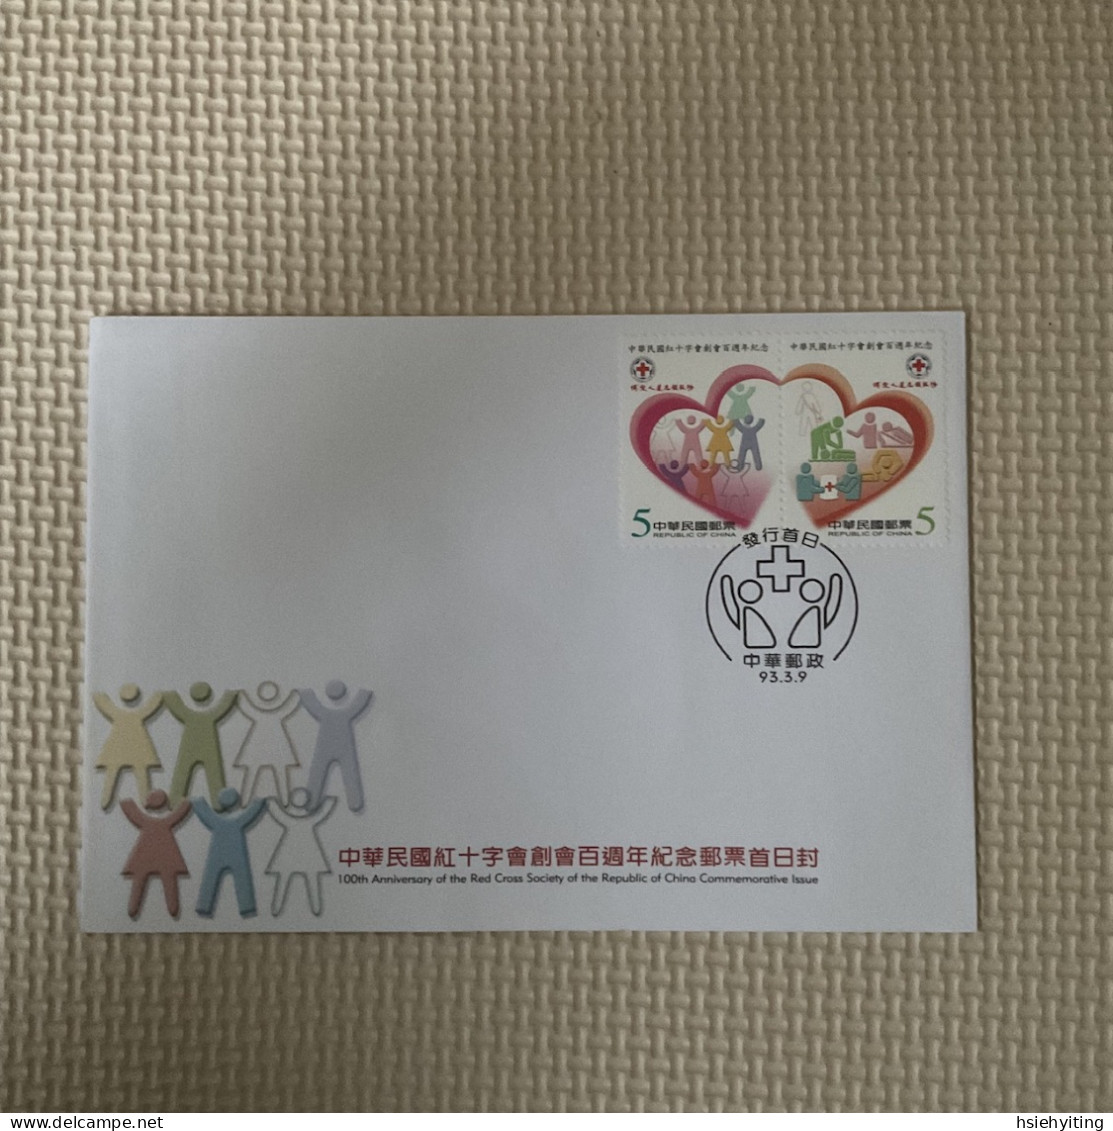 Taiwan Postage Stamps - Red Cross